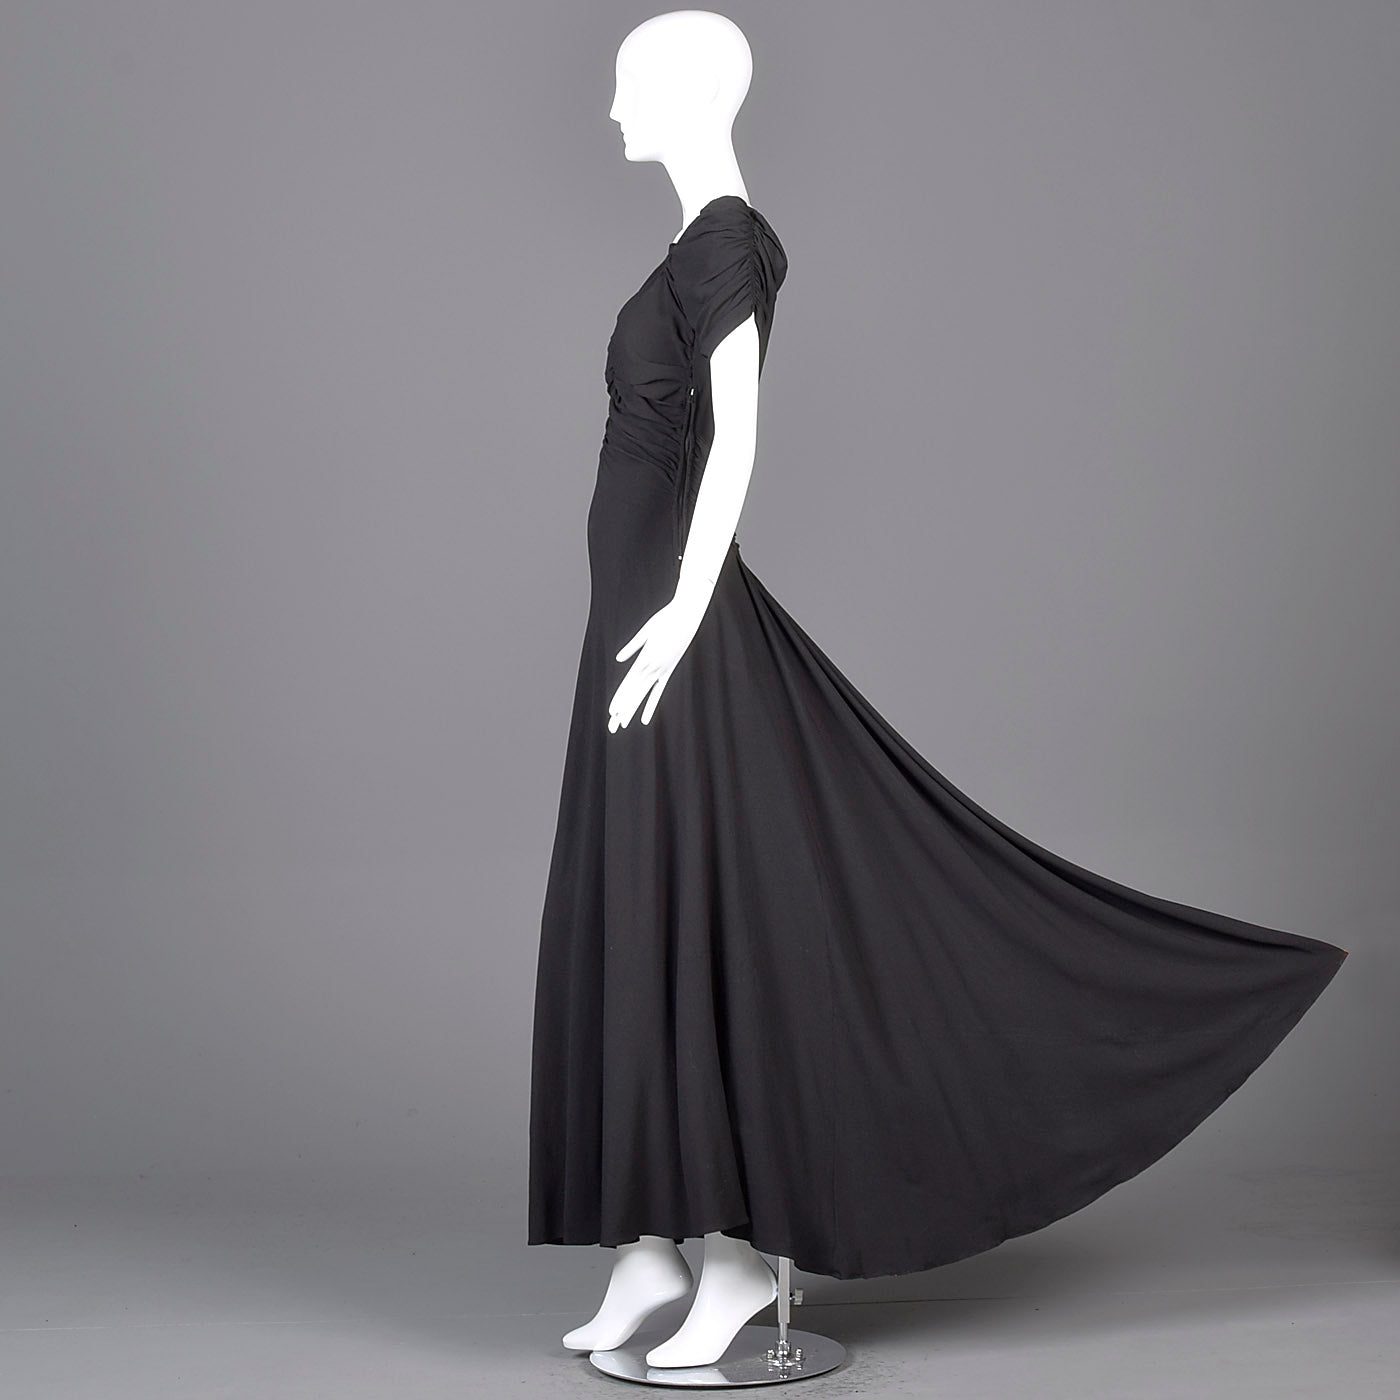 1940s Black Crepe Evening Gown with Short Sleeves & Ruched Bodice